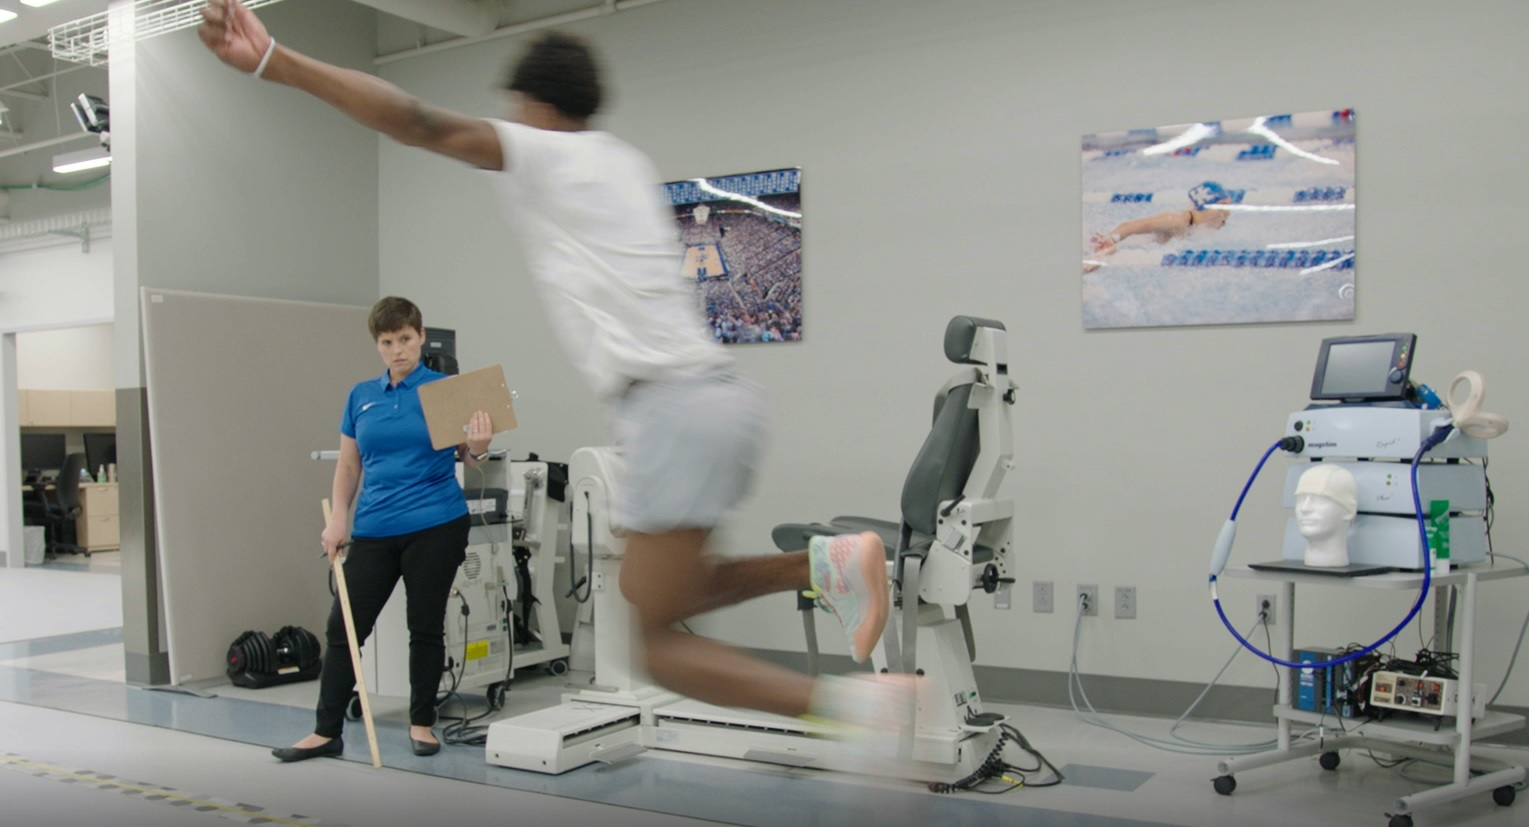 Ahead of the Curve at UK's Sports Medicine Research Institute